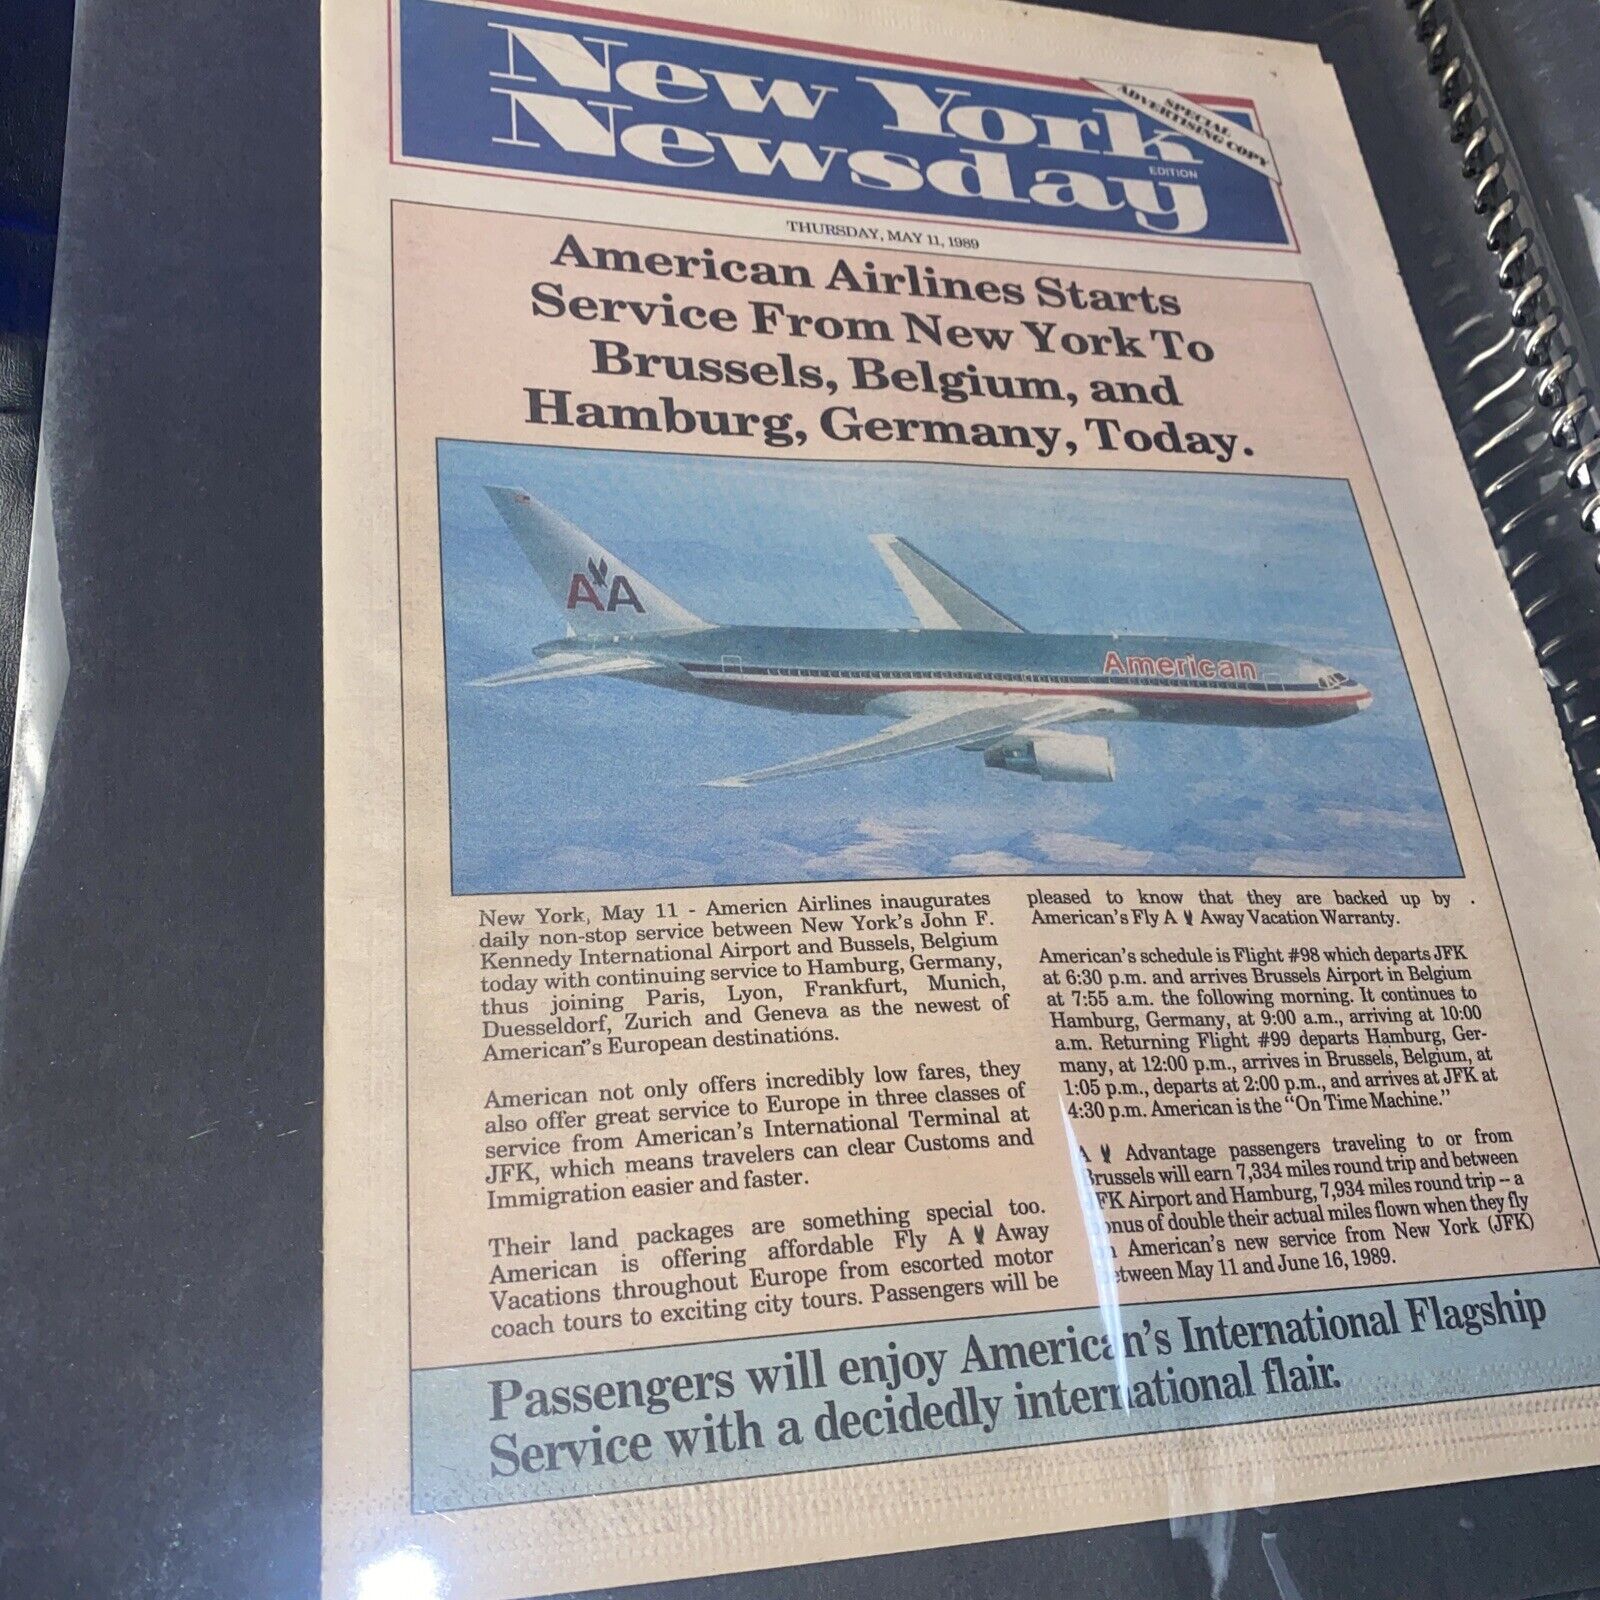 Newsday Front page May 11, 1989 American Airlines Starts Service from New York